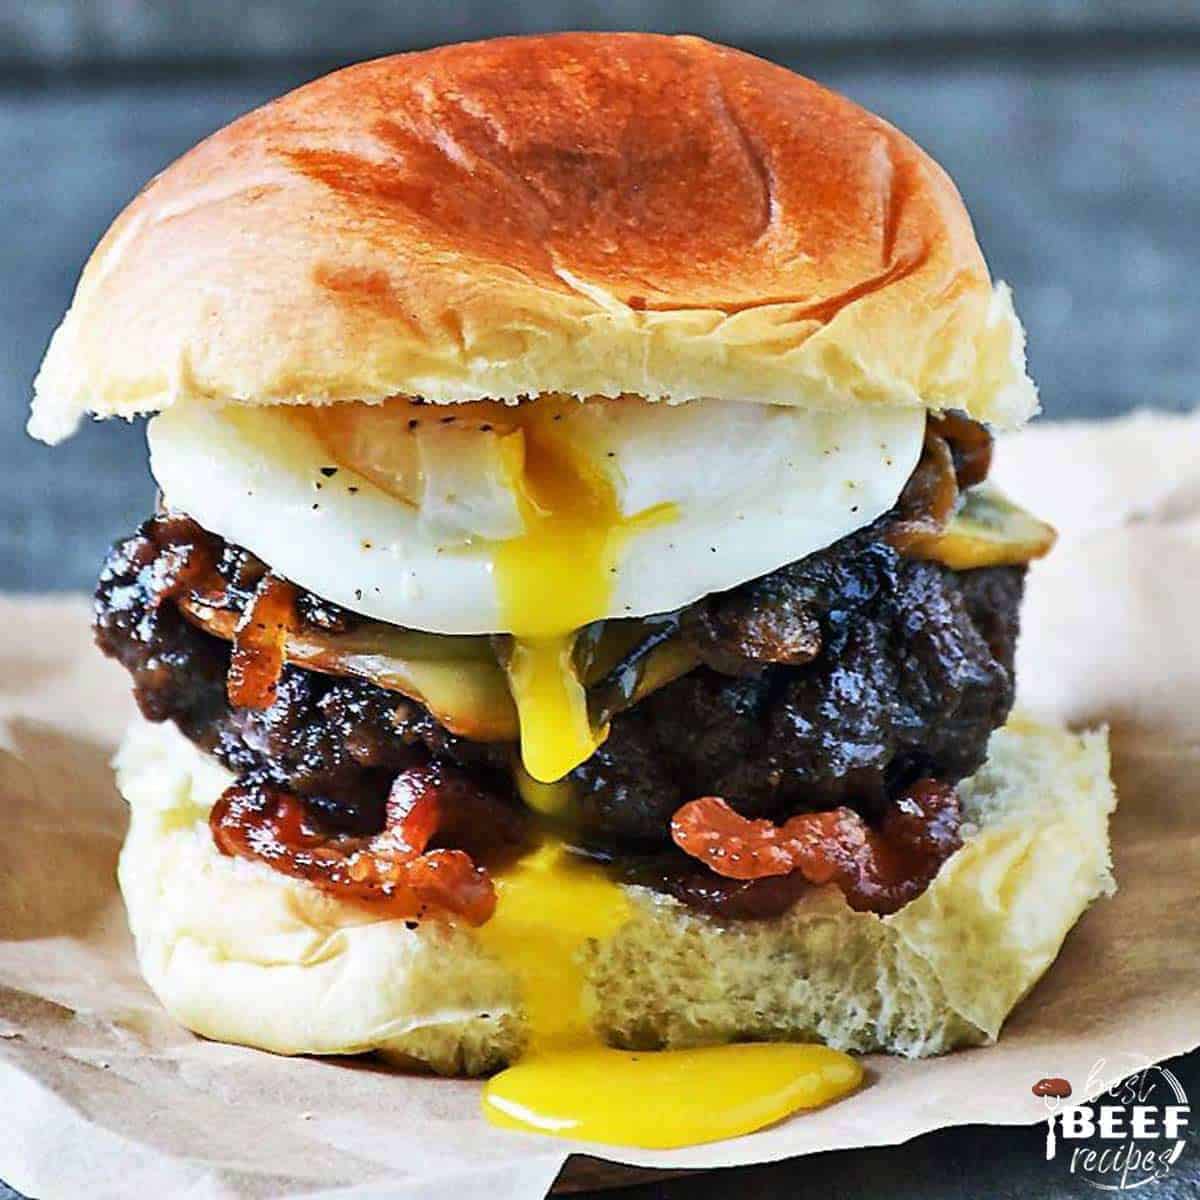 Poached egg burger recipe with a grilled burger, caramelized onions, and egg running down the side on a sheet of butcher paper